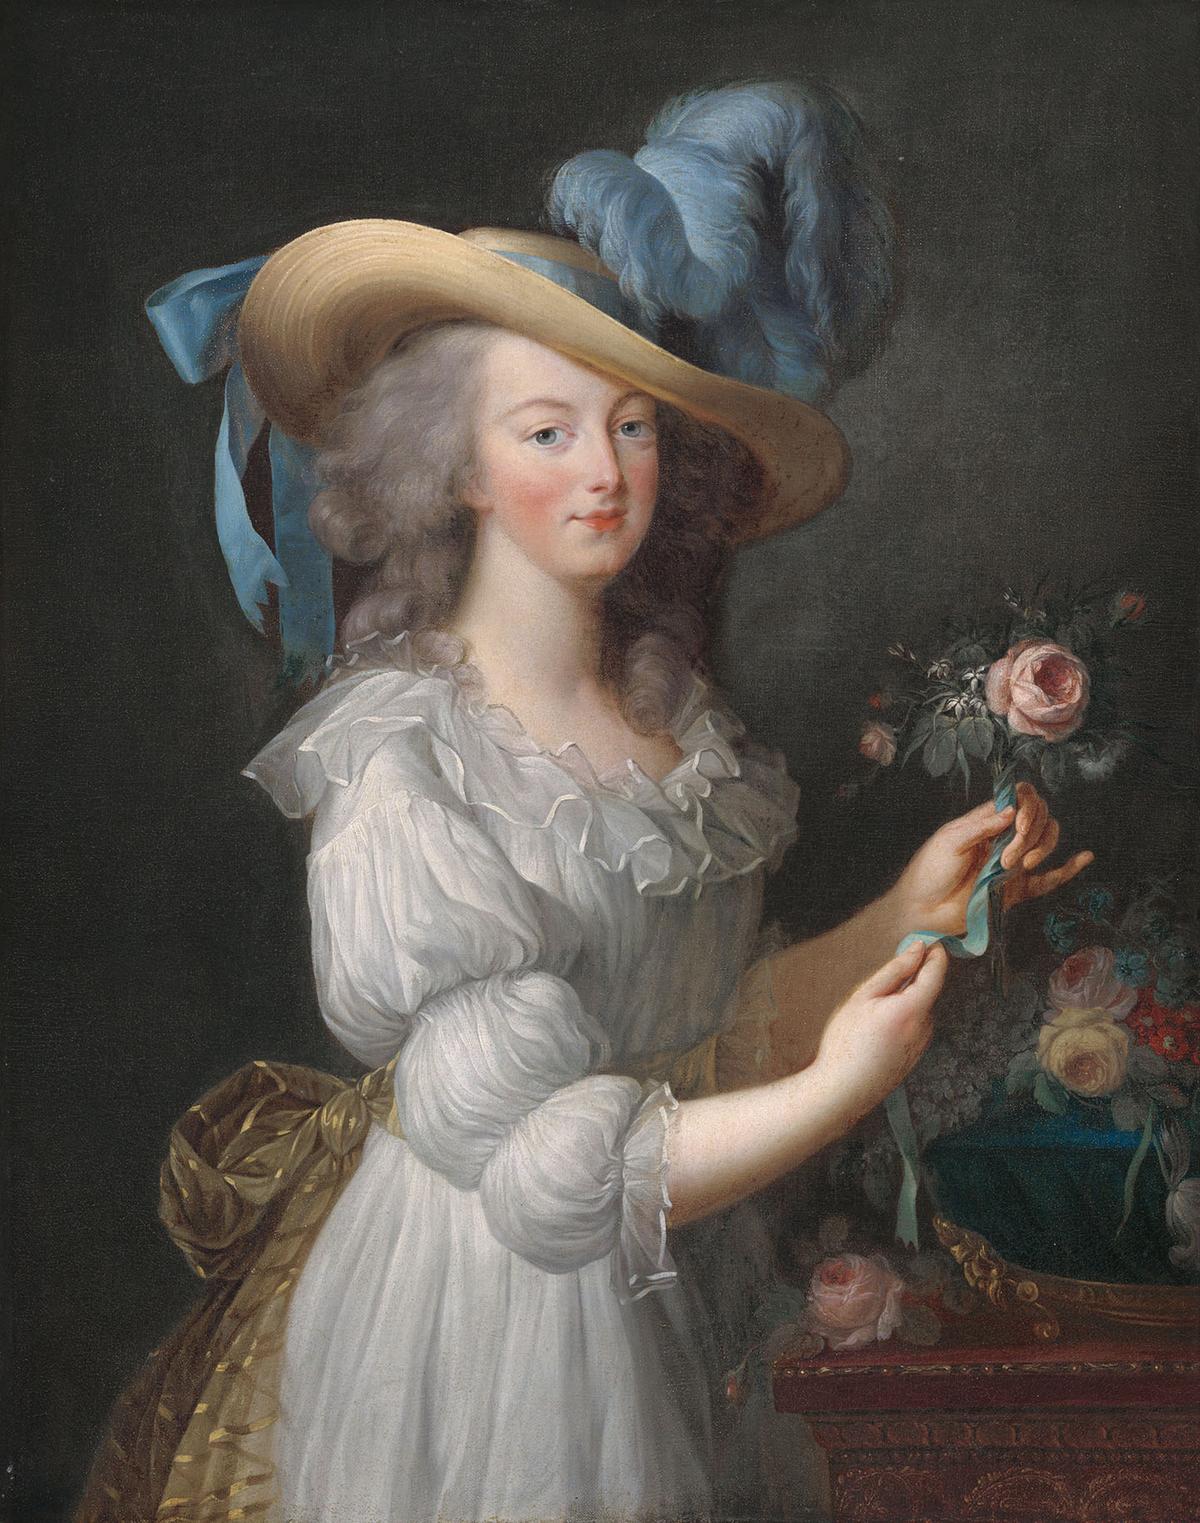 “Marie Antoinette in a Chemise Dress,” after 1783, by anonymous painter after Élisabeth-Louise Vigée Le Brun. Oil on canvas. Timken Collection, National Gallery of Art, Washington. (Public Domain)